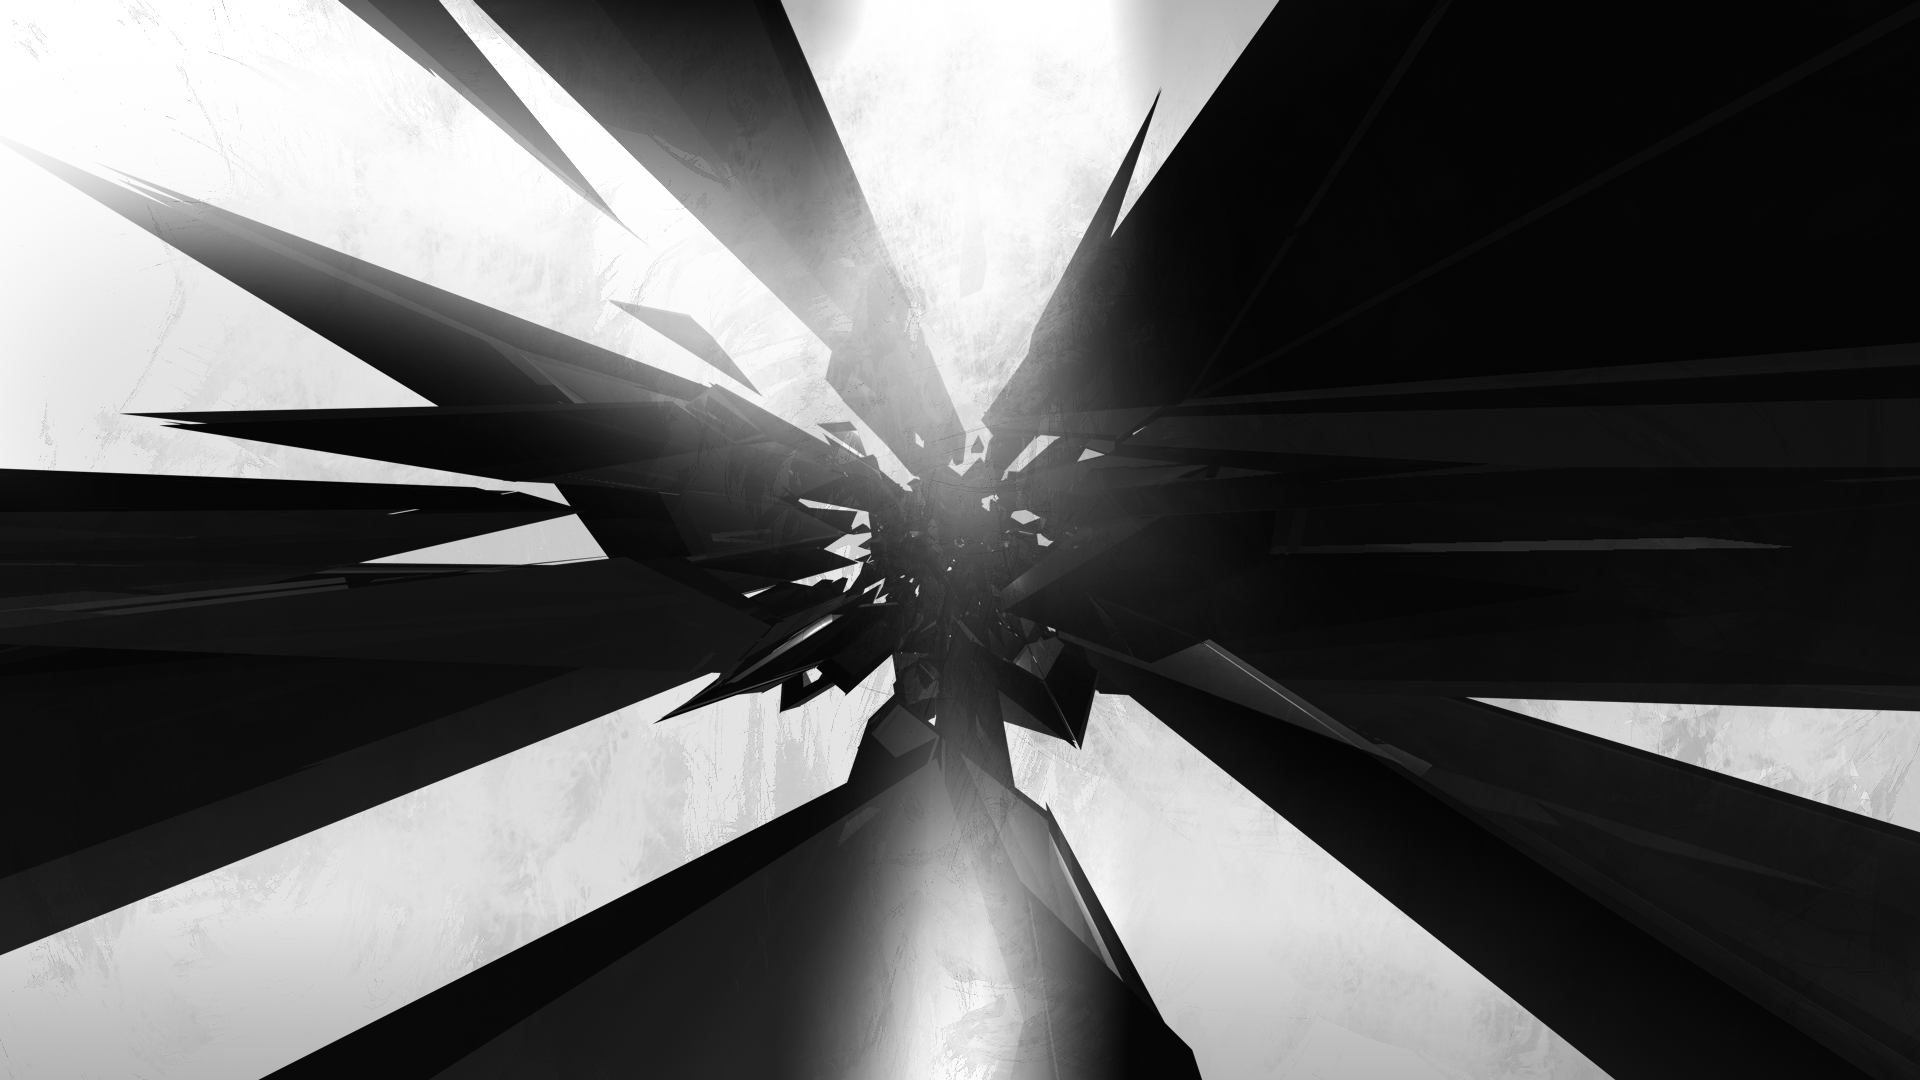 Another Black And White Abstract Wallpaper By Tomsimo